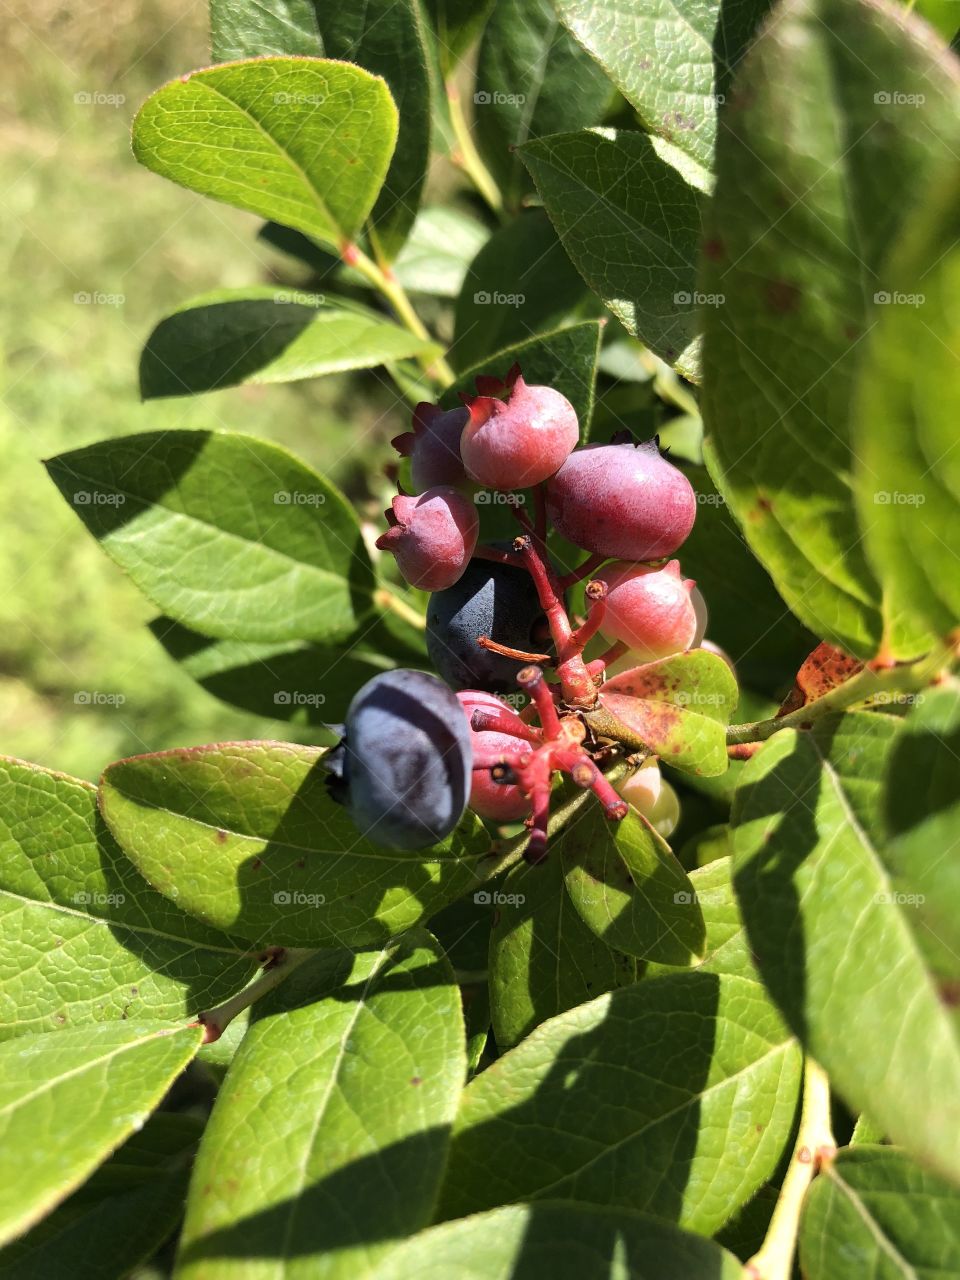 Nothing like blueberry picking under a bright July sky. The darker the berry the sweeter the fruit. The lighter the color, the tangy taste.